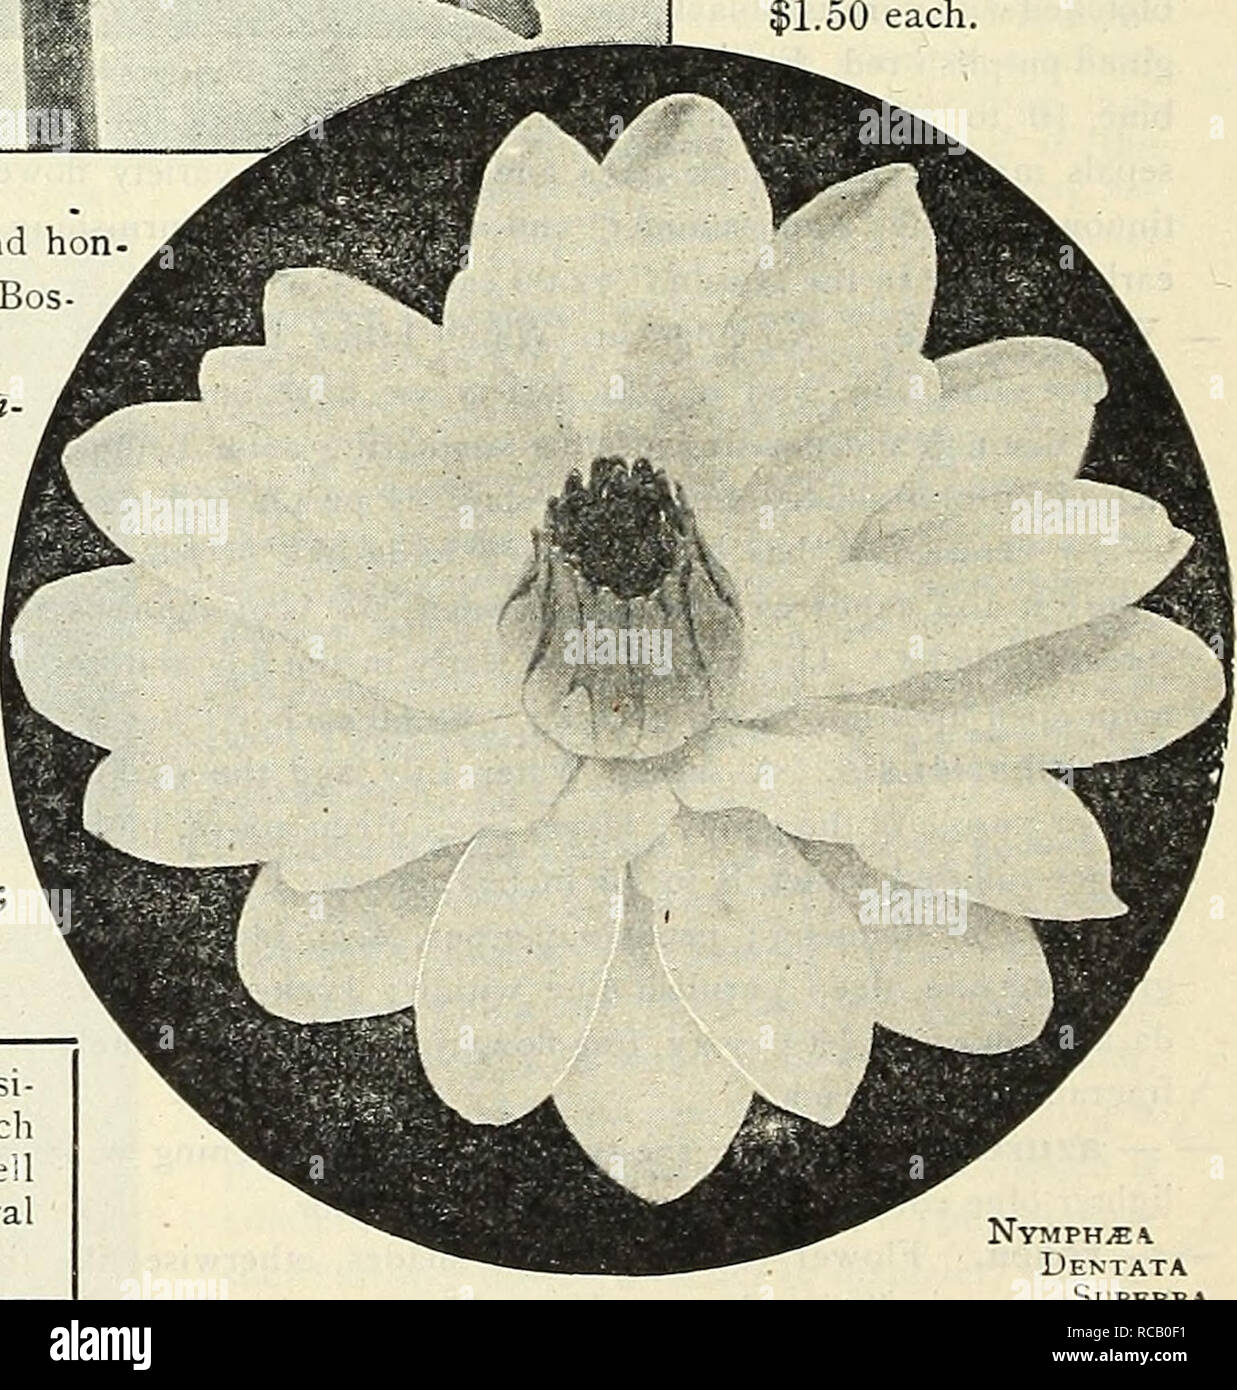 . Dreer's 1838 1908 garden book. Seeds Catalogs; Nursery stock Catalogs; Gardening Equipment and supplies Catalogs; Flowers Seeds Catalogs; Vegetables Seeds Catalogs; Fruit Seeds Catalogs. Dentata [IV. ortigiesiana Planch). Flower^ white; measuring from 8 tn 1 inches in diameter, opeii- ingoiit horizontally, leaves dark glossy green, heavily dehtated. 75 cts. each ; .50 per doz. Dentata Magnifica. Tins handsome variety is dis- tinguished from N. dentata by its broad sepals and petals and the cup shape of its creamy-white flowers which are 10 to 12 inches across, leaves large, ovate, dark gree Stock Photo